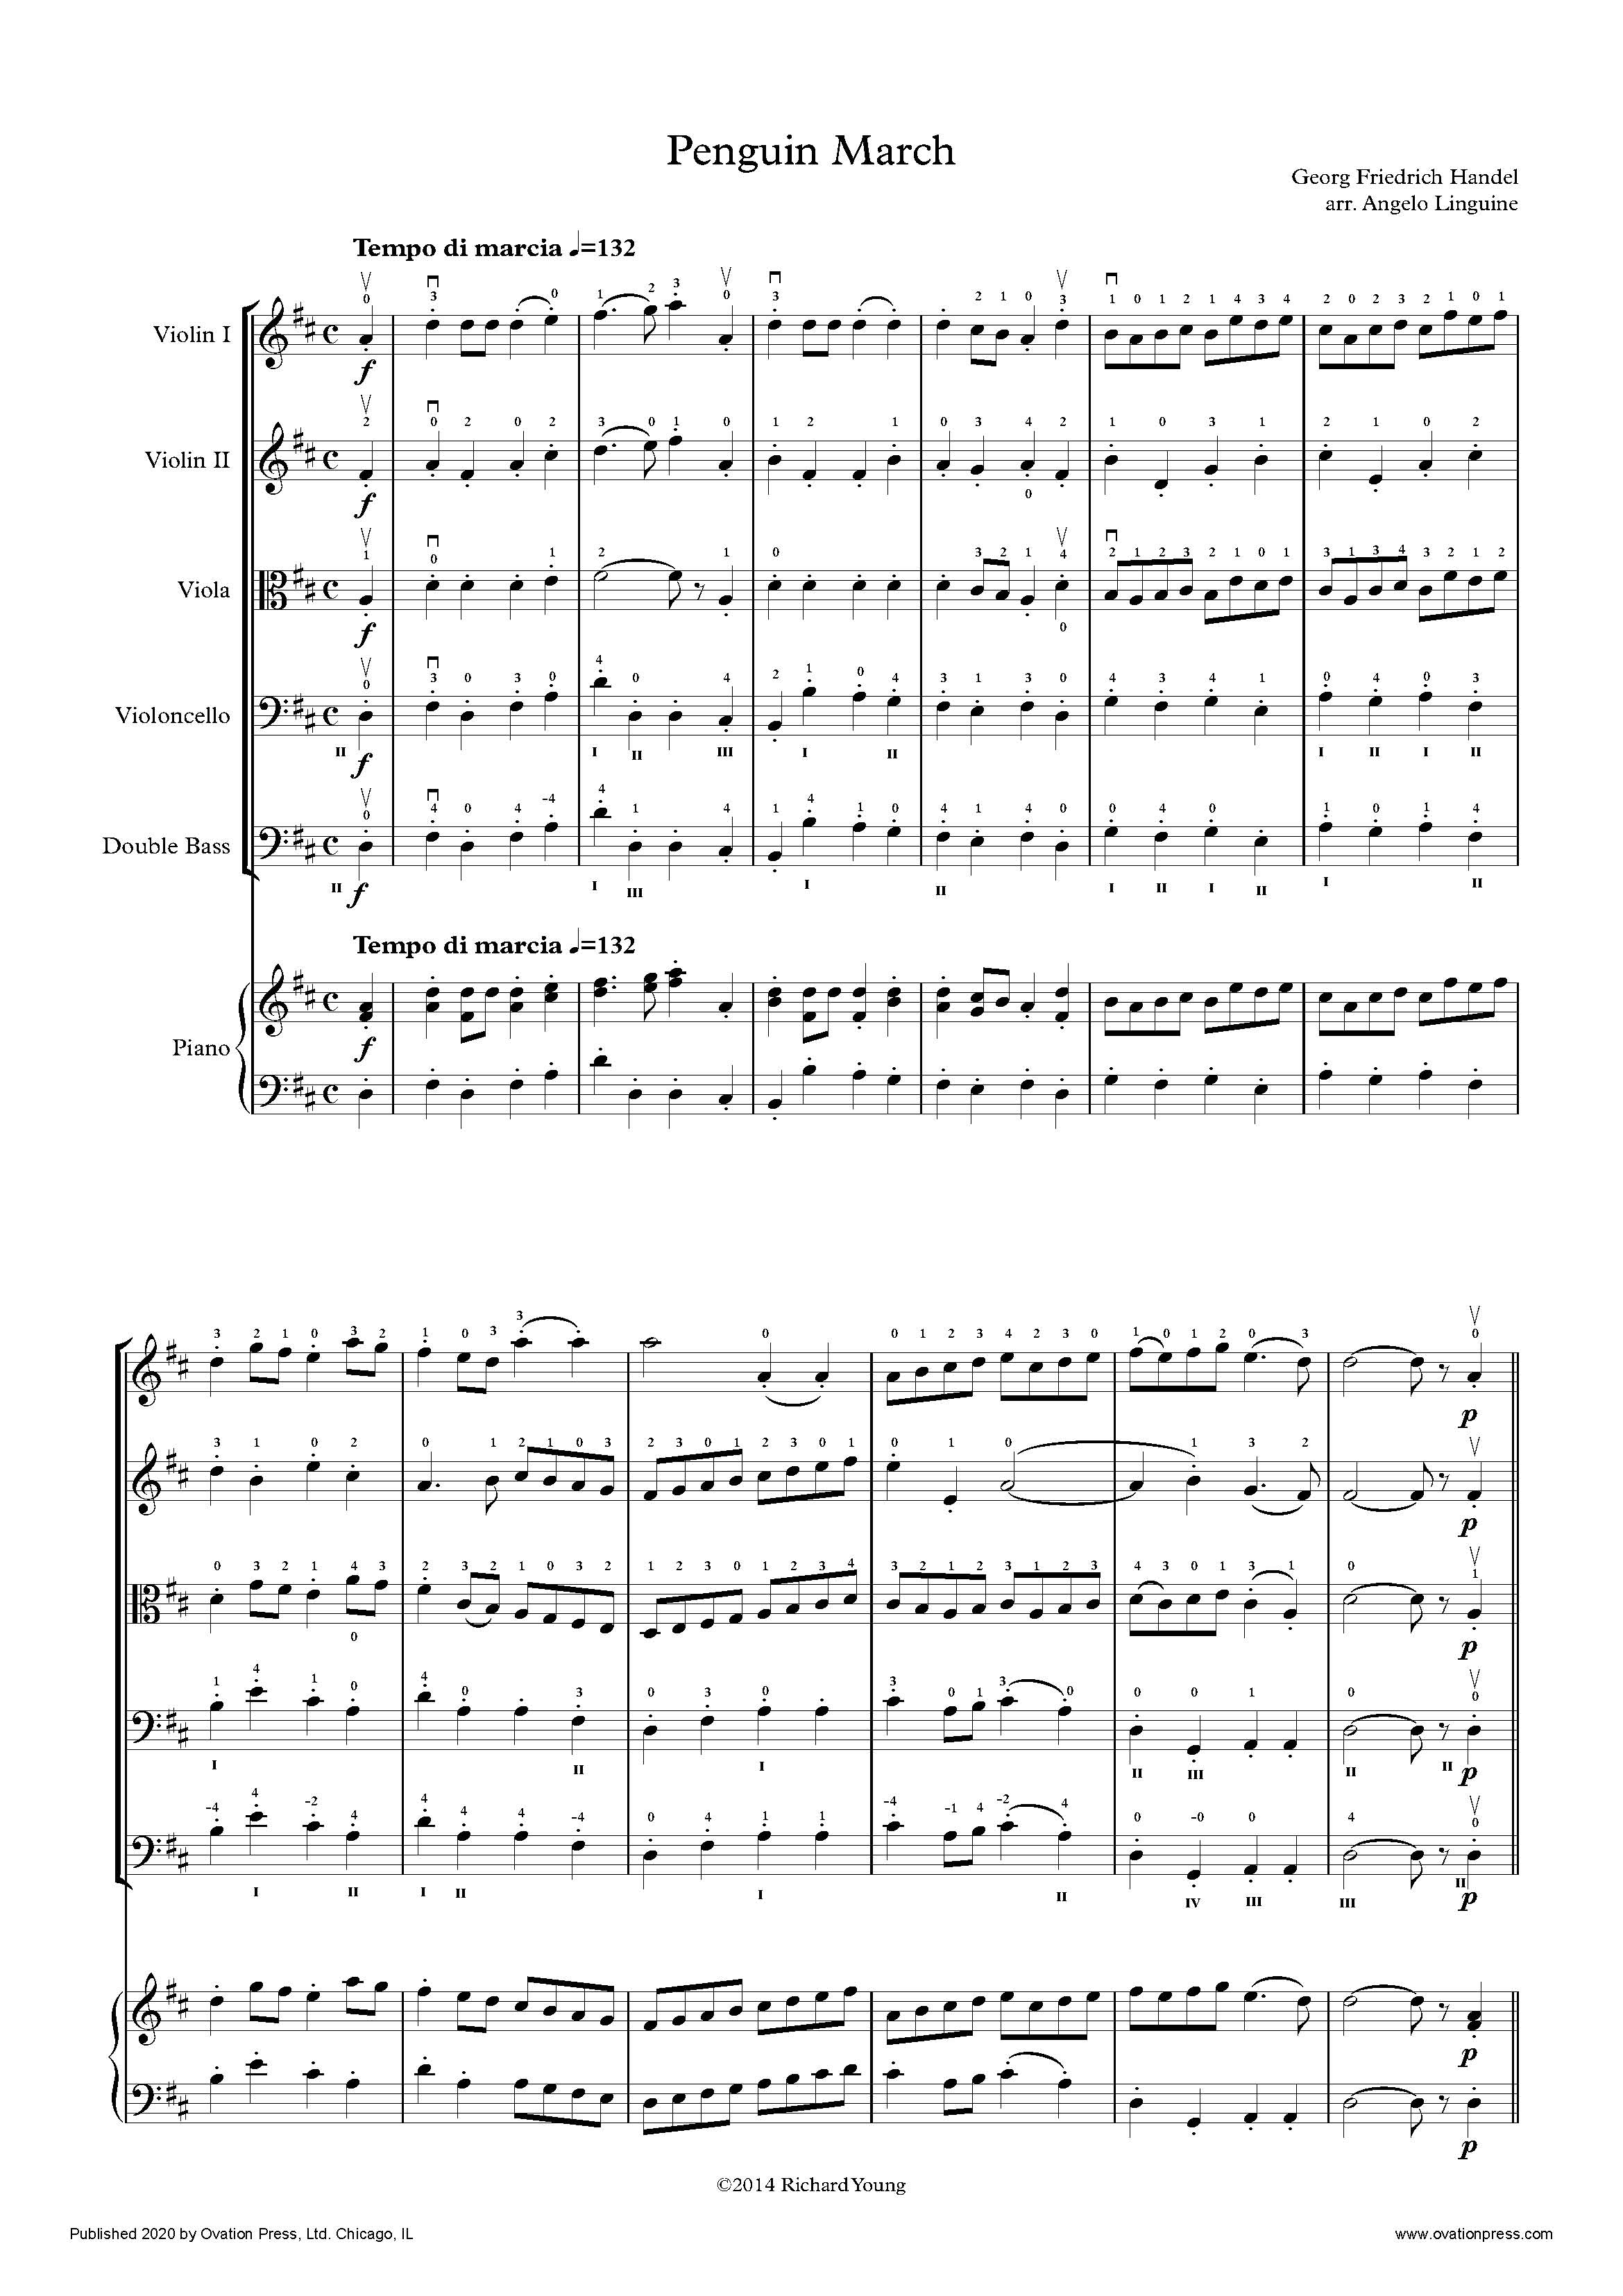 Handel Penguin March (for Elementary String Orchestra)